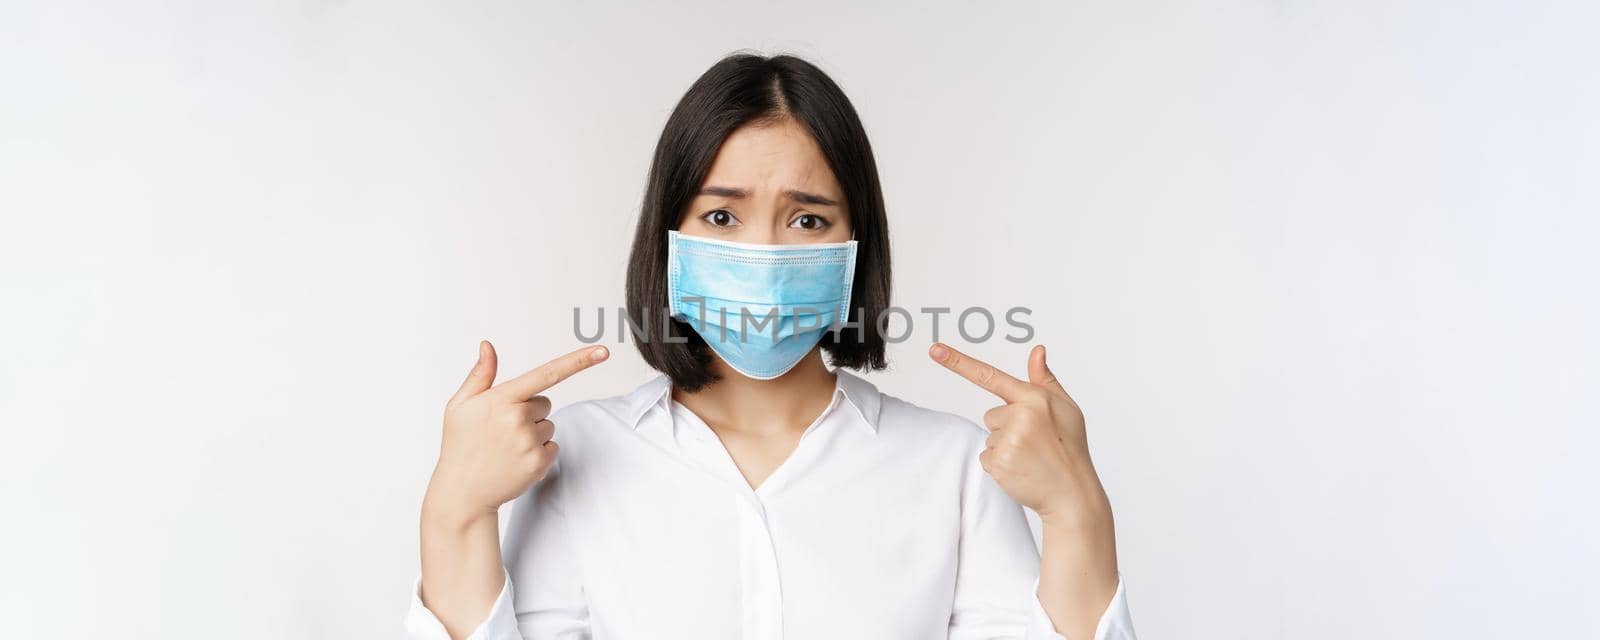 Close up of sad asian girl in medical face mask pointing at her head and looking upset, standing over white background.